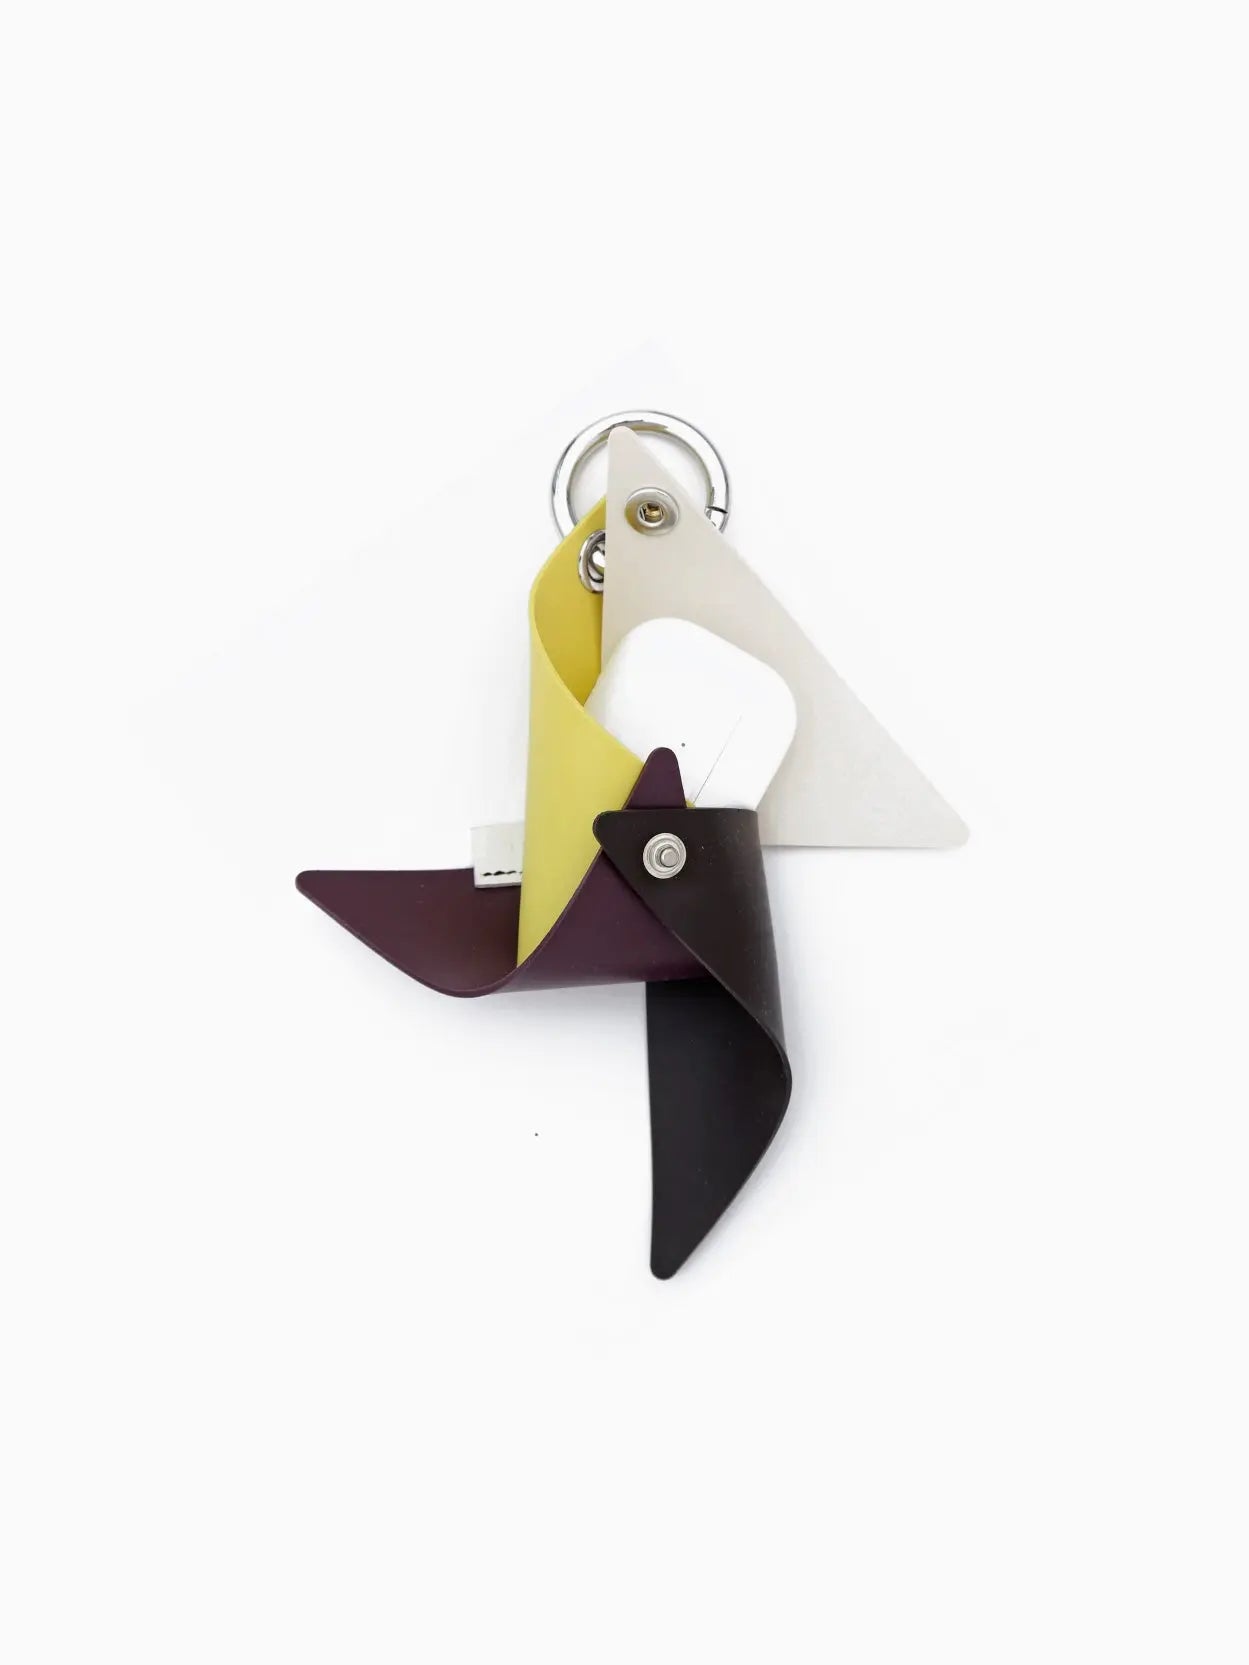 A Gomma Girandola Airpods Holder Multi Off White by Sunnei designed to resemble a pinwheel with four blades, colored yellow, white, dark purple, and dark brown. The metal keyring is attached at the top. This stylish accessory can be found at Bassalstore in Barcelona. The entire design sits against a plain white background.